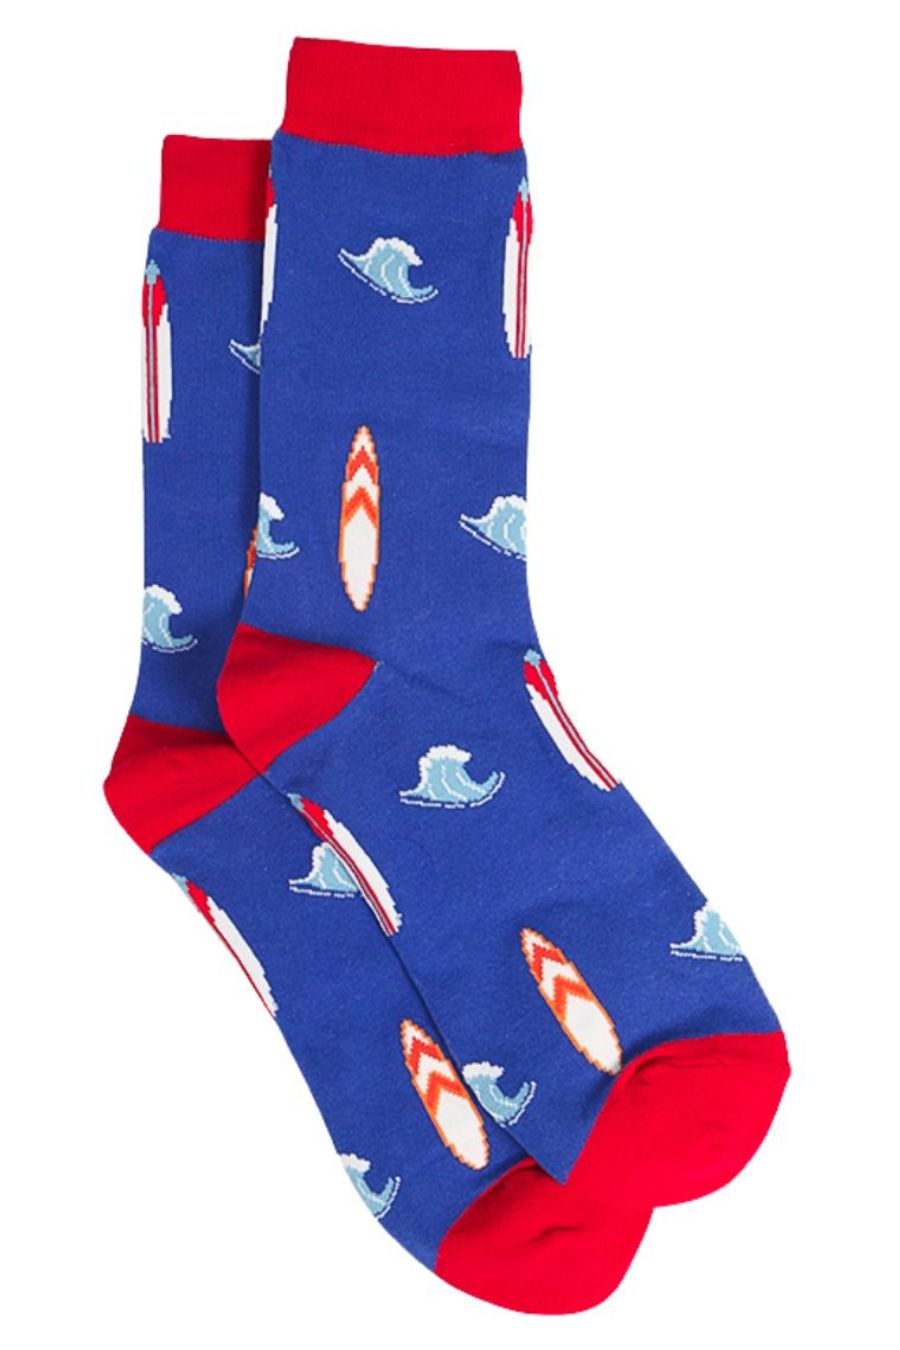 blue and red dress socks with a pattern of surf boards and waves